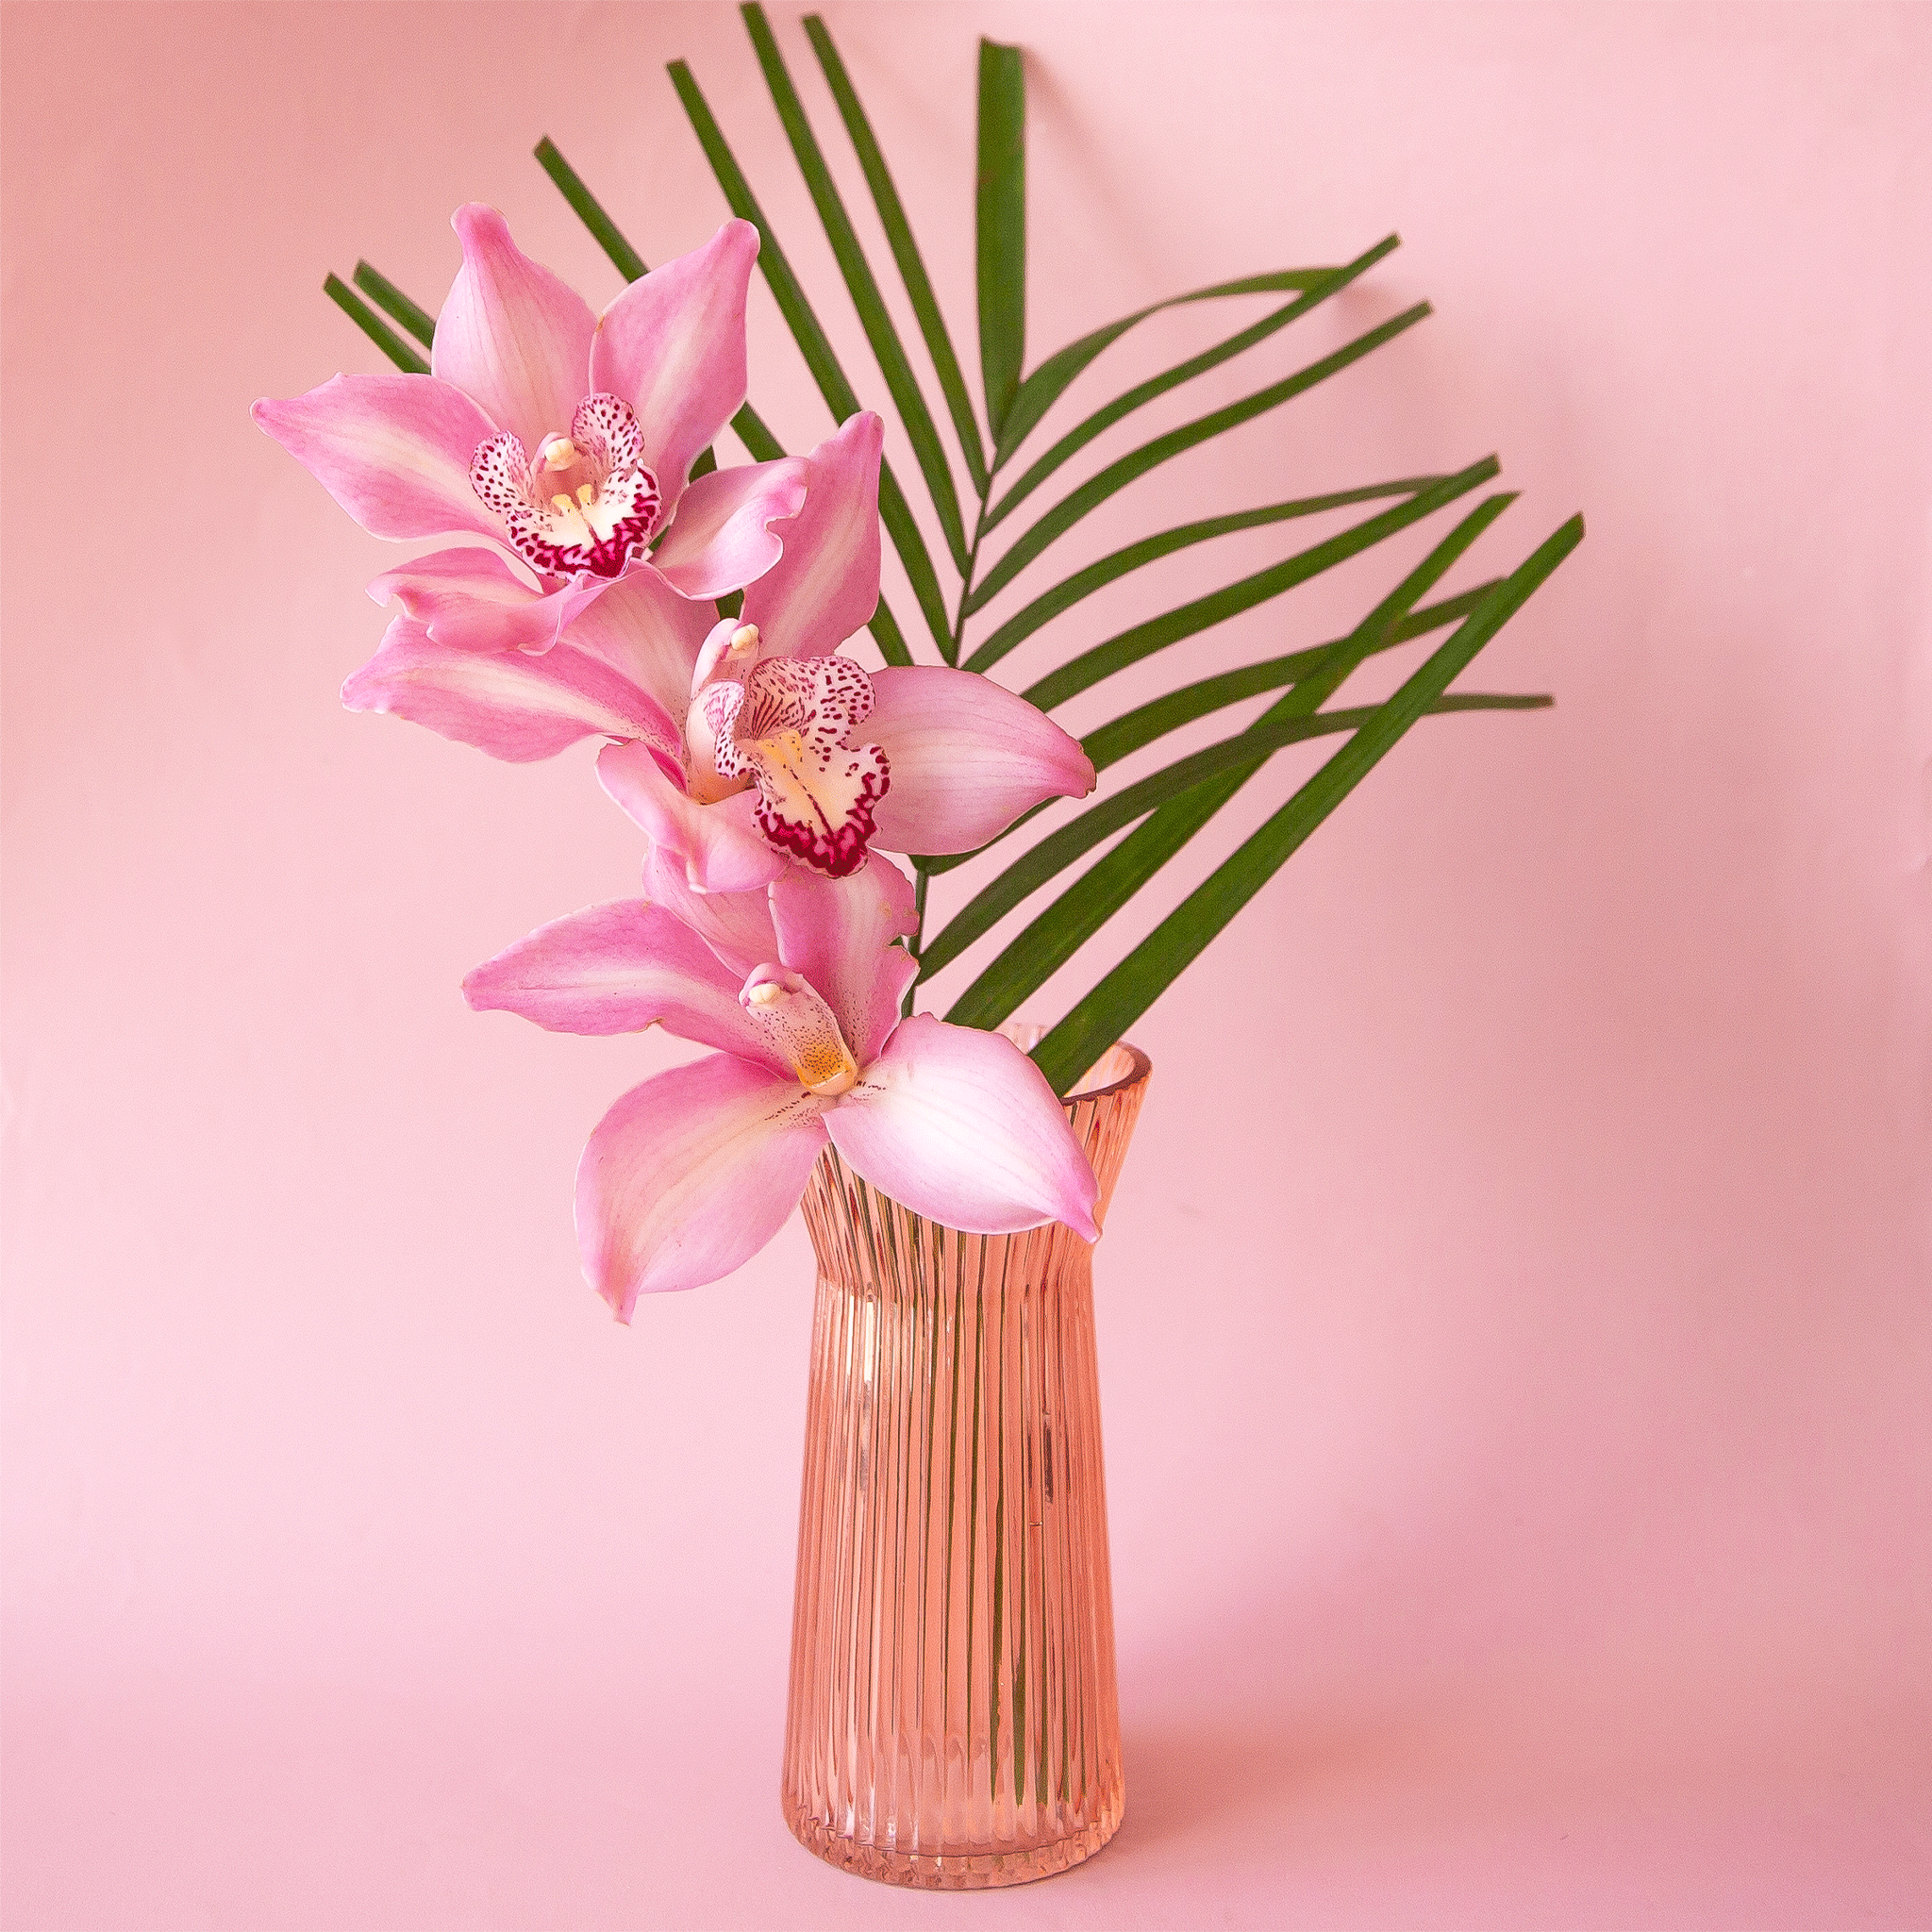 On a pink background is a apricot colored ribbed glass vase with a pink orchid inside.